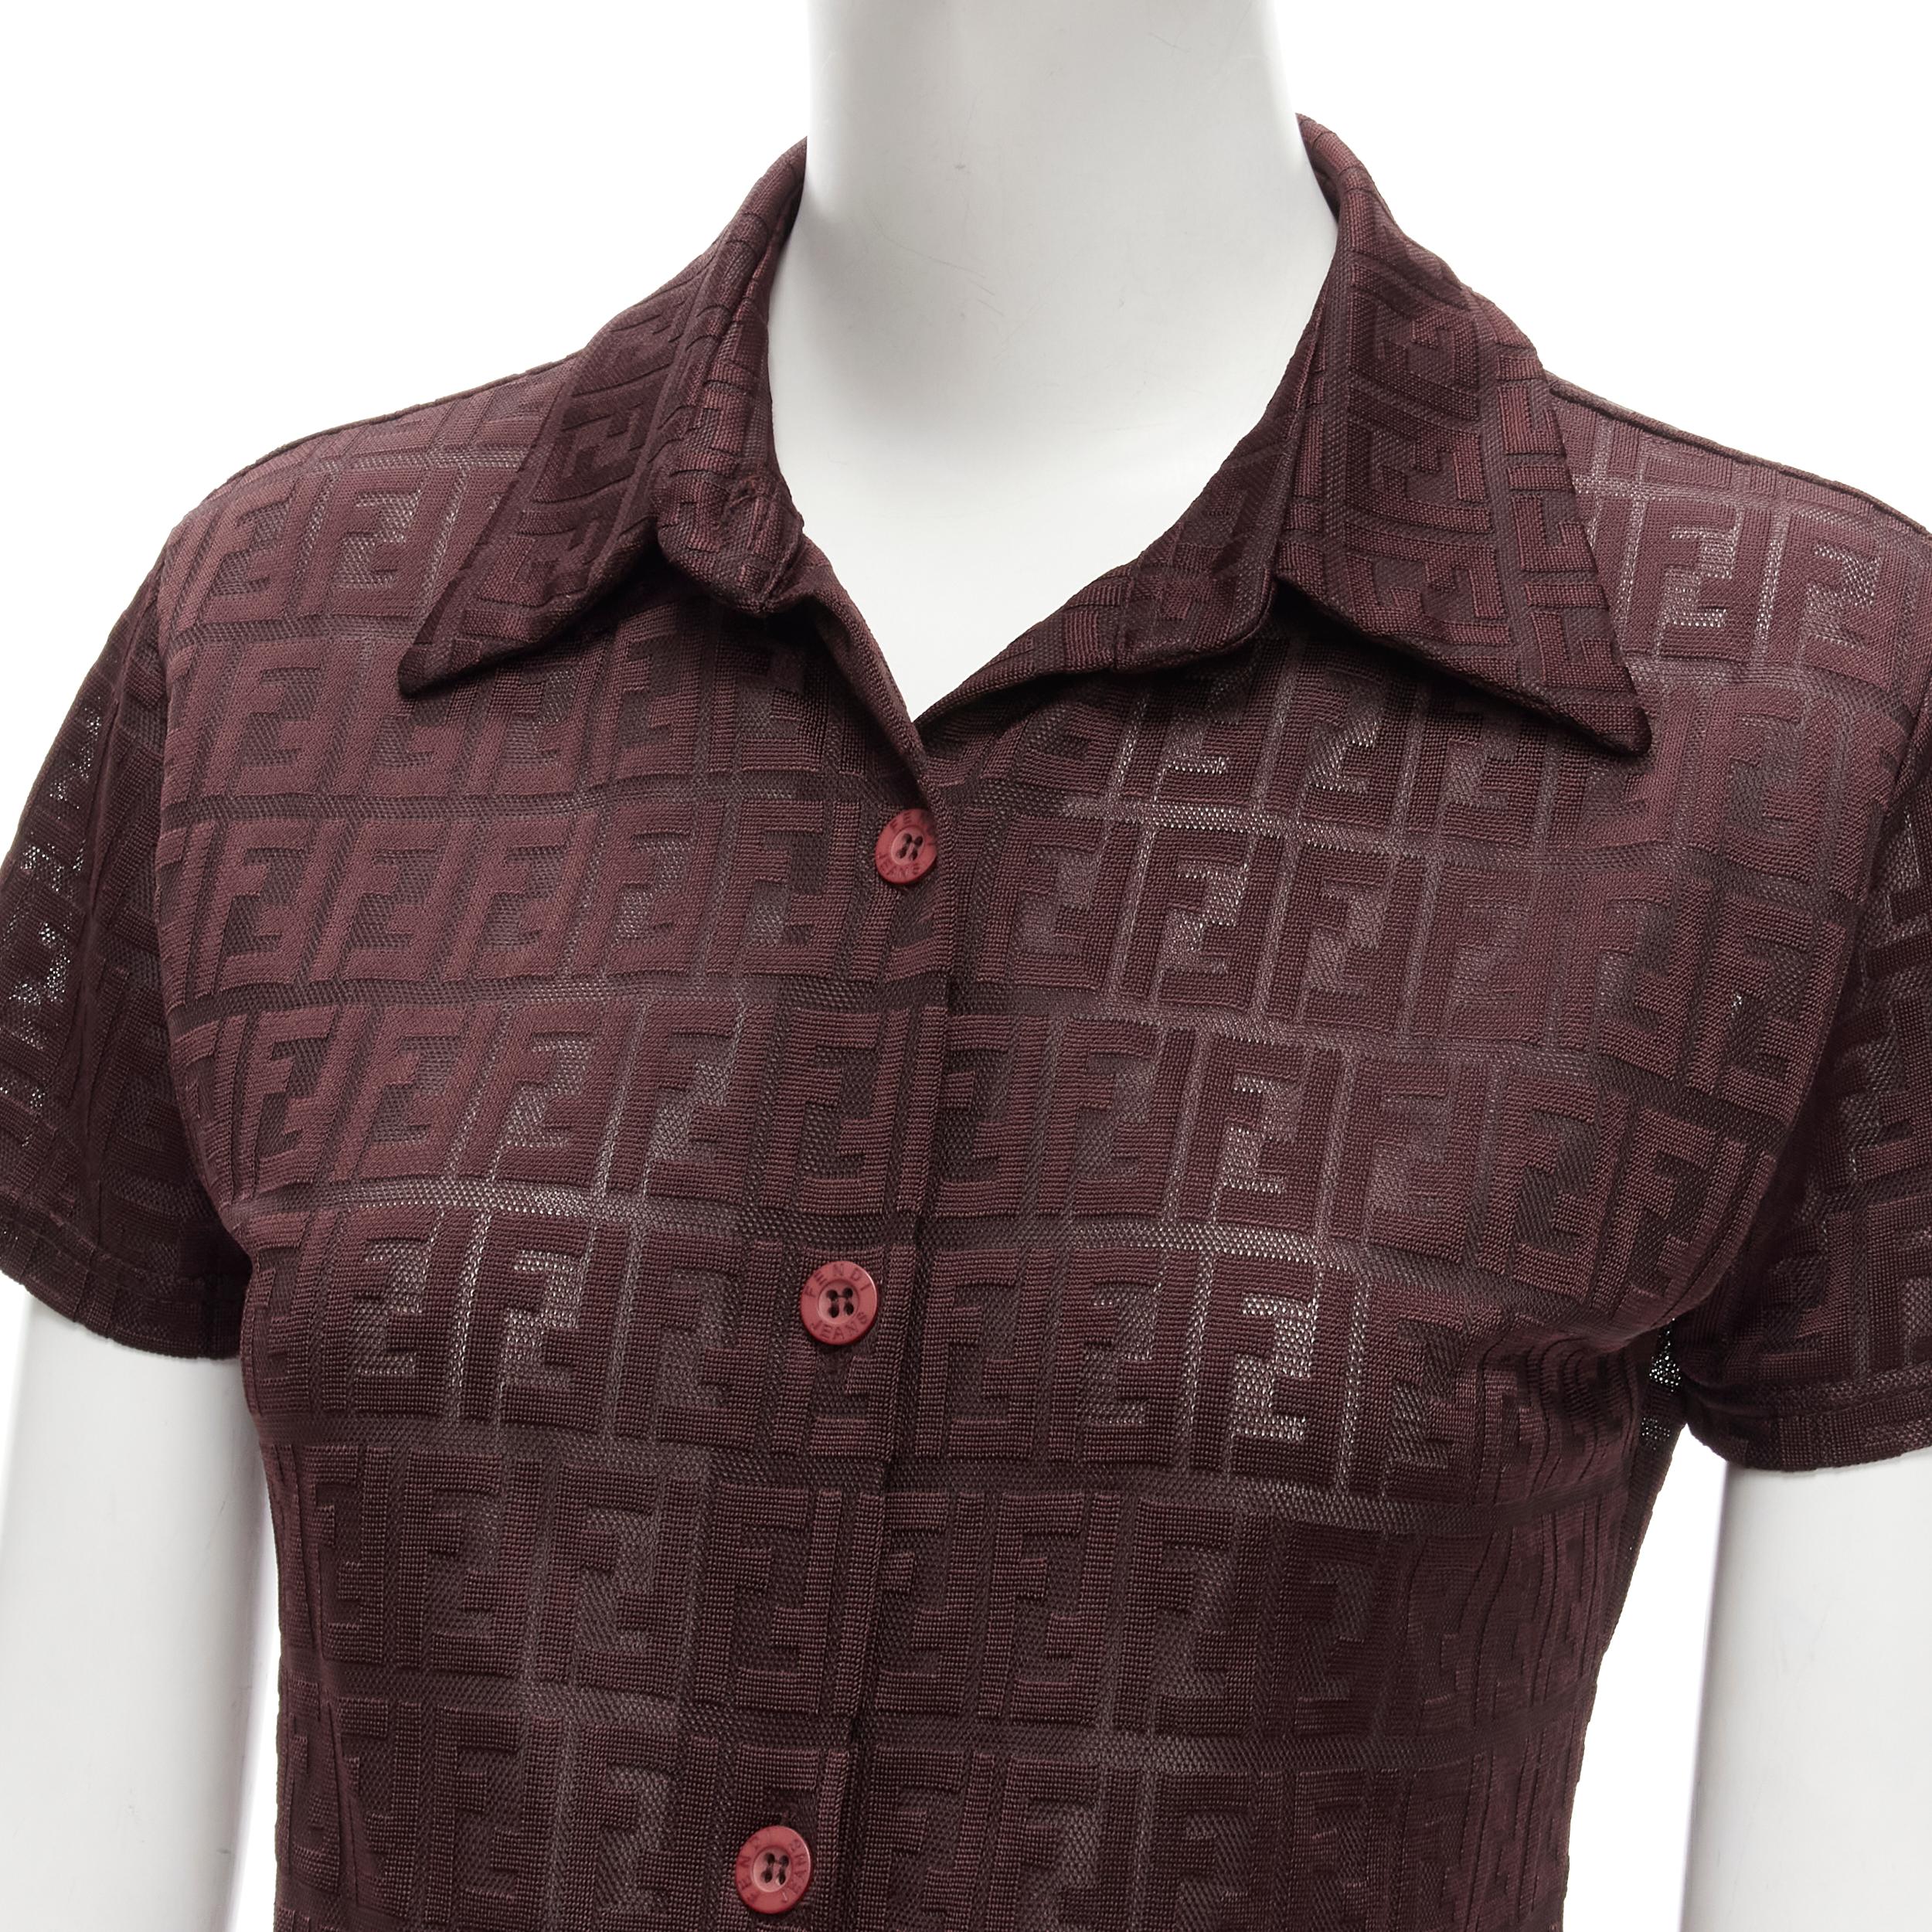 FENDI JEANS Vintage Y2K burgundy FF Zucca intarsia sheer polo shirt
Reference: TGAS/C01718
Brand: Fendi
Collection: Vintage Jeans label
Material: Polyester, Blend
Color: Burgundy
Pattern: Monogram
Closure: Button
Made in: